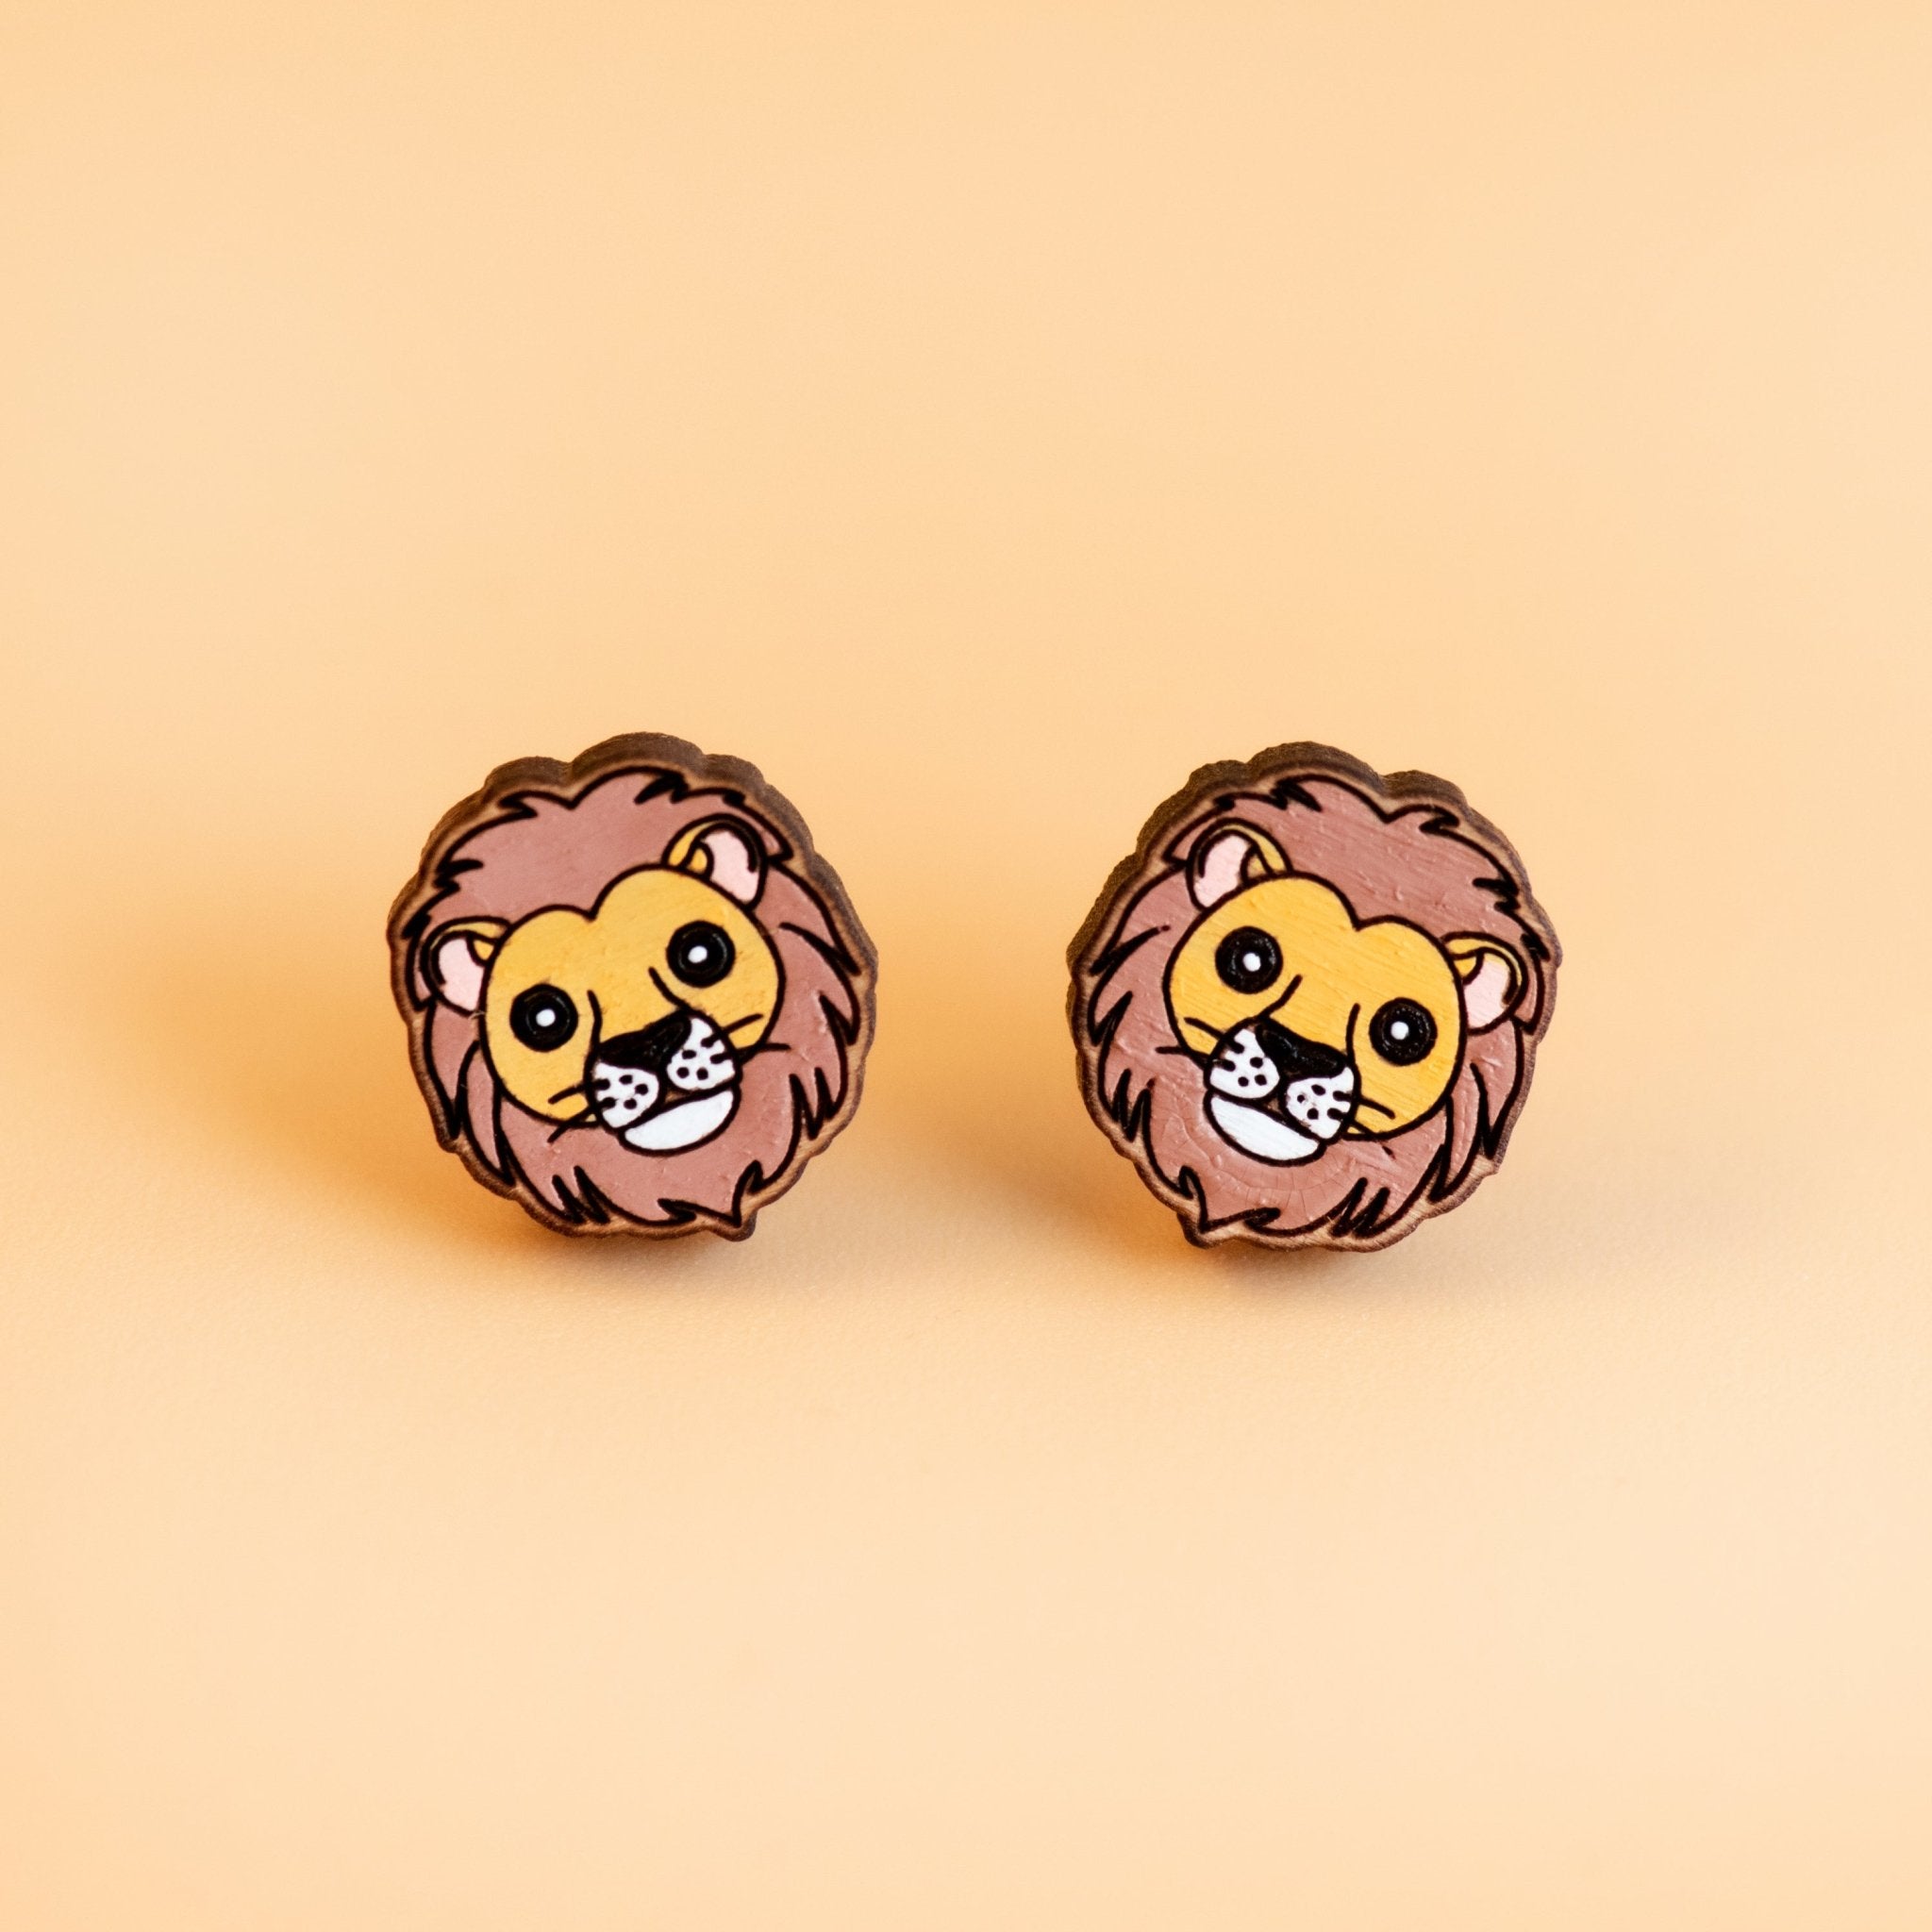 Hand-painted Lion Earrings Cherry Wood Earrings - PEL10193 - Robin Valley Official Store